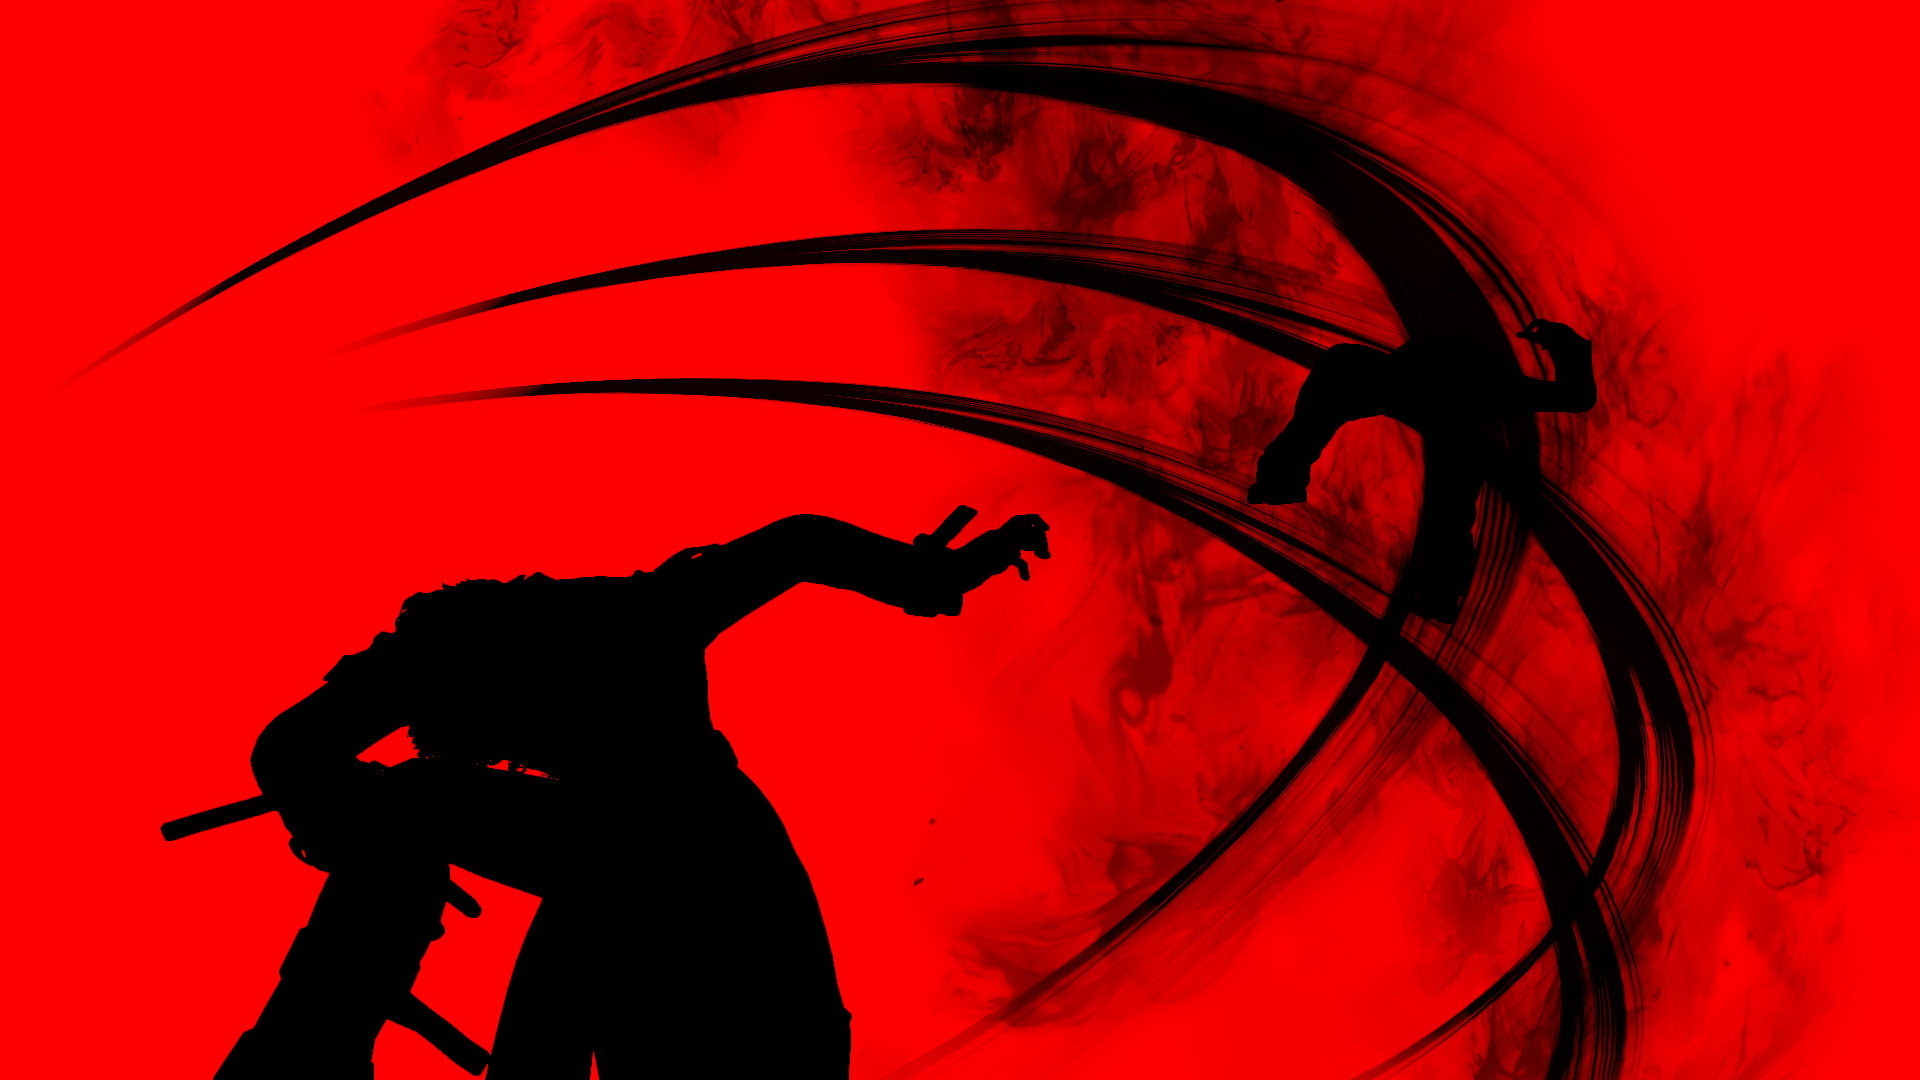 Iori Yagami wallpapers, Posted by Ryan Simpson, Gaming backgrounds, High-resolution images, 1920x1080 Full HD Desktop